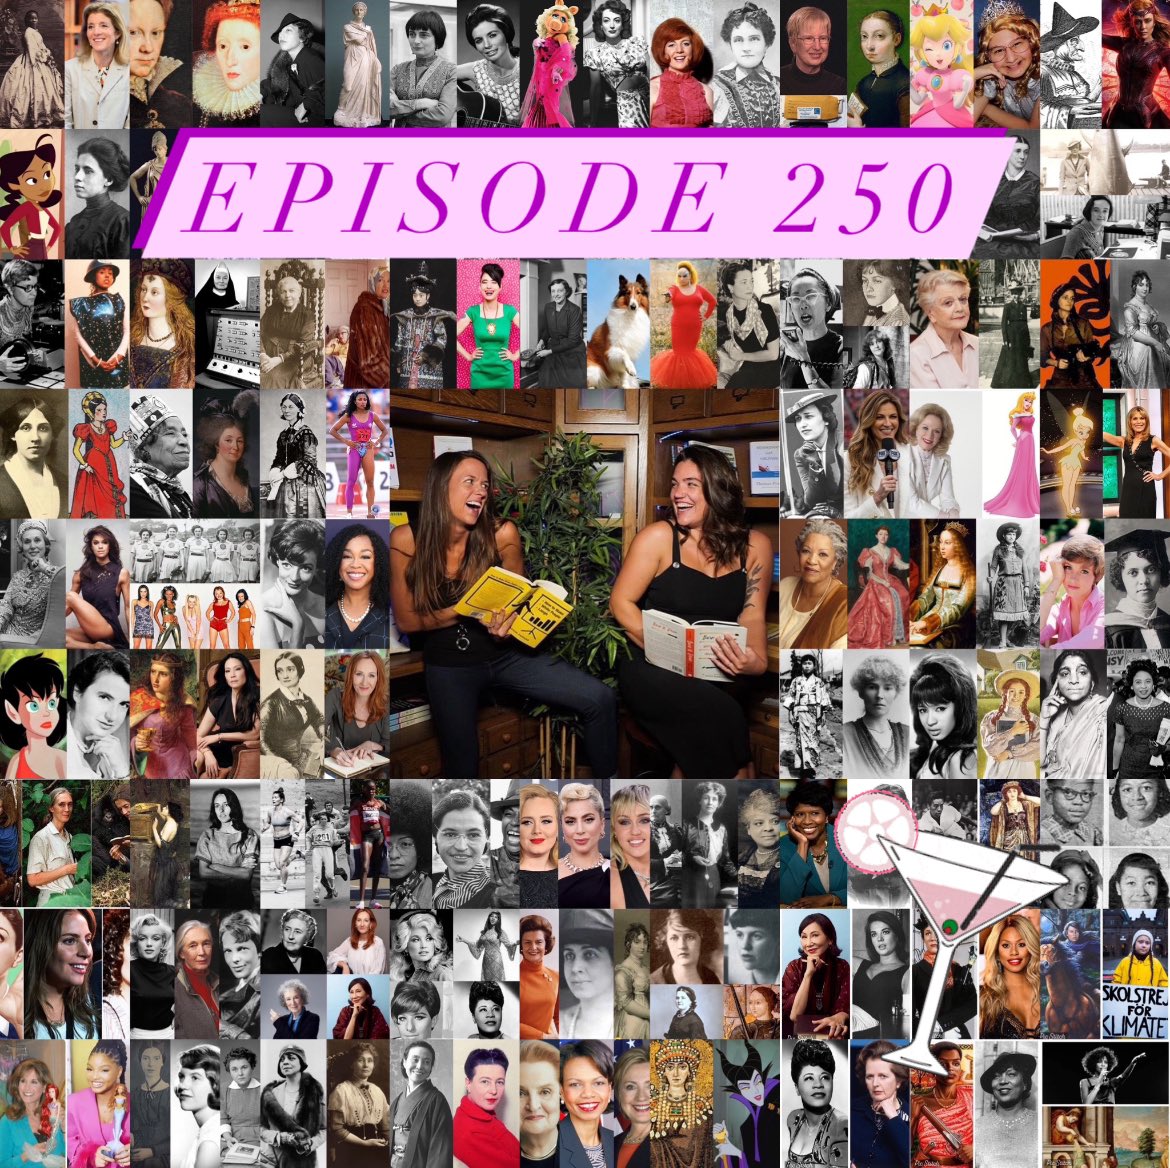 💥FIVE HUNDRED WOMEN 💥 Today Katie & Allie are releasing their 250th episode of HERstory on the Rocks 🍸! They’ve now covered 500 good women, bad women, fictional women, and non-fictional women from all times and places because - women have nuance 💟